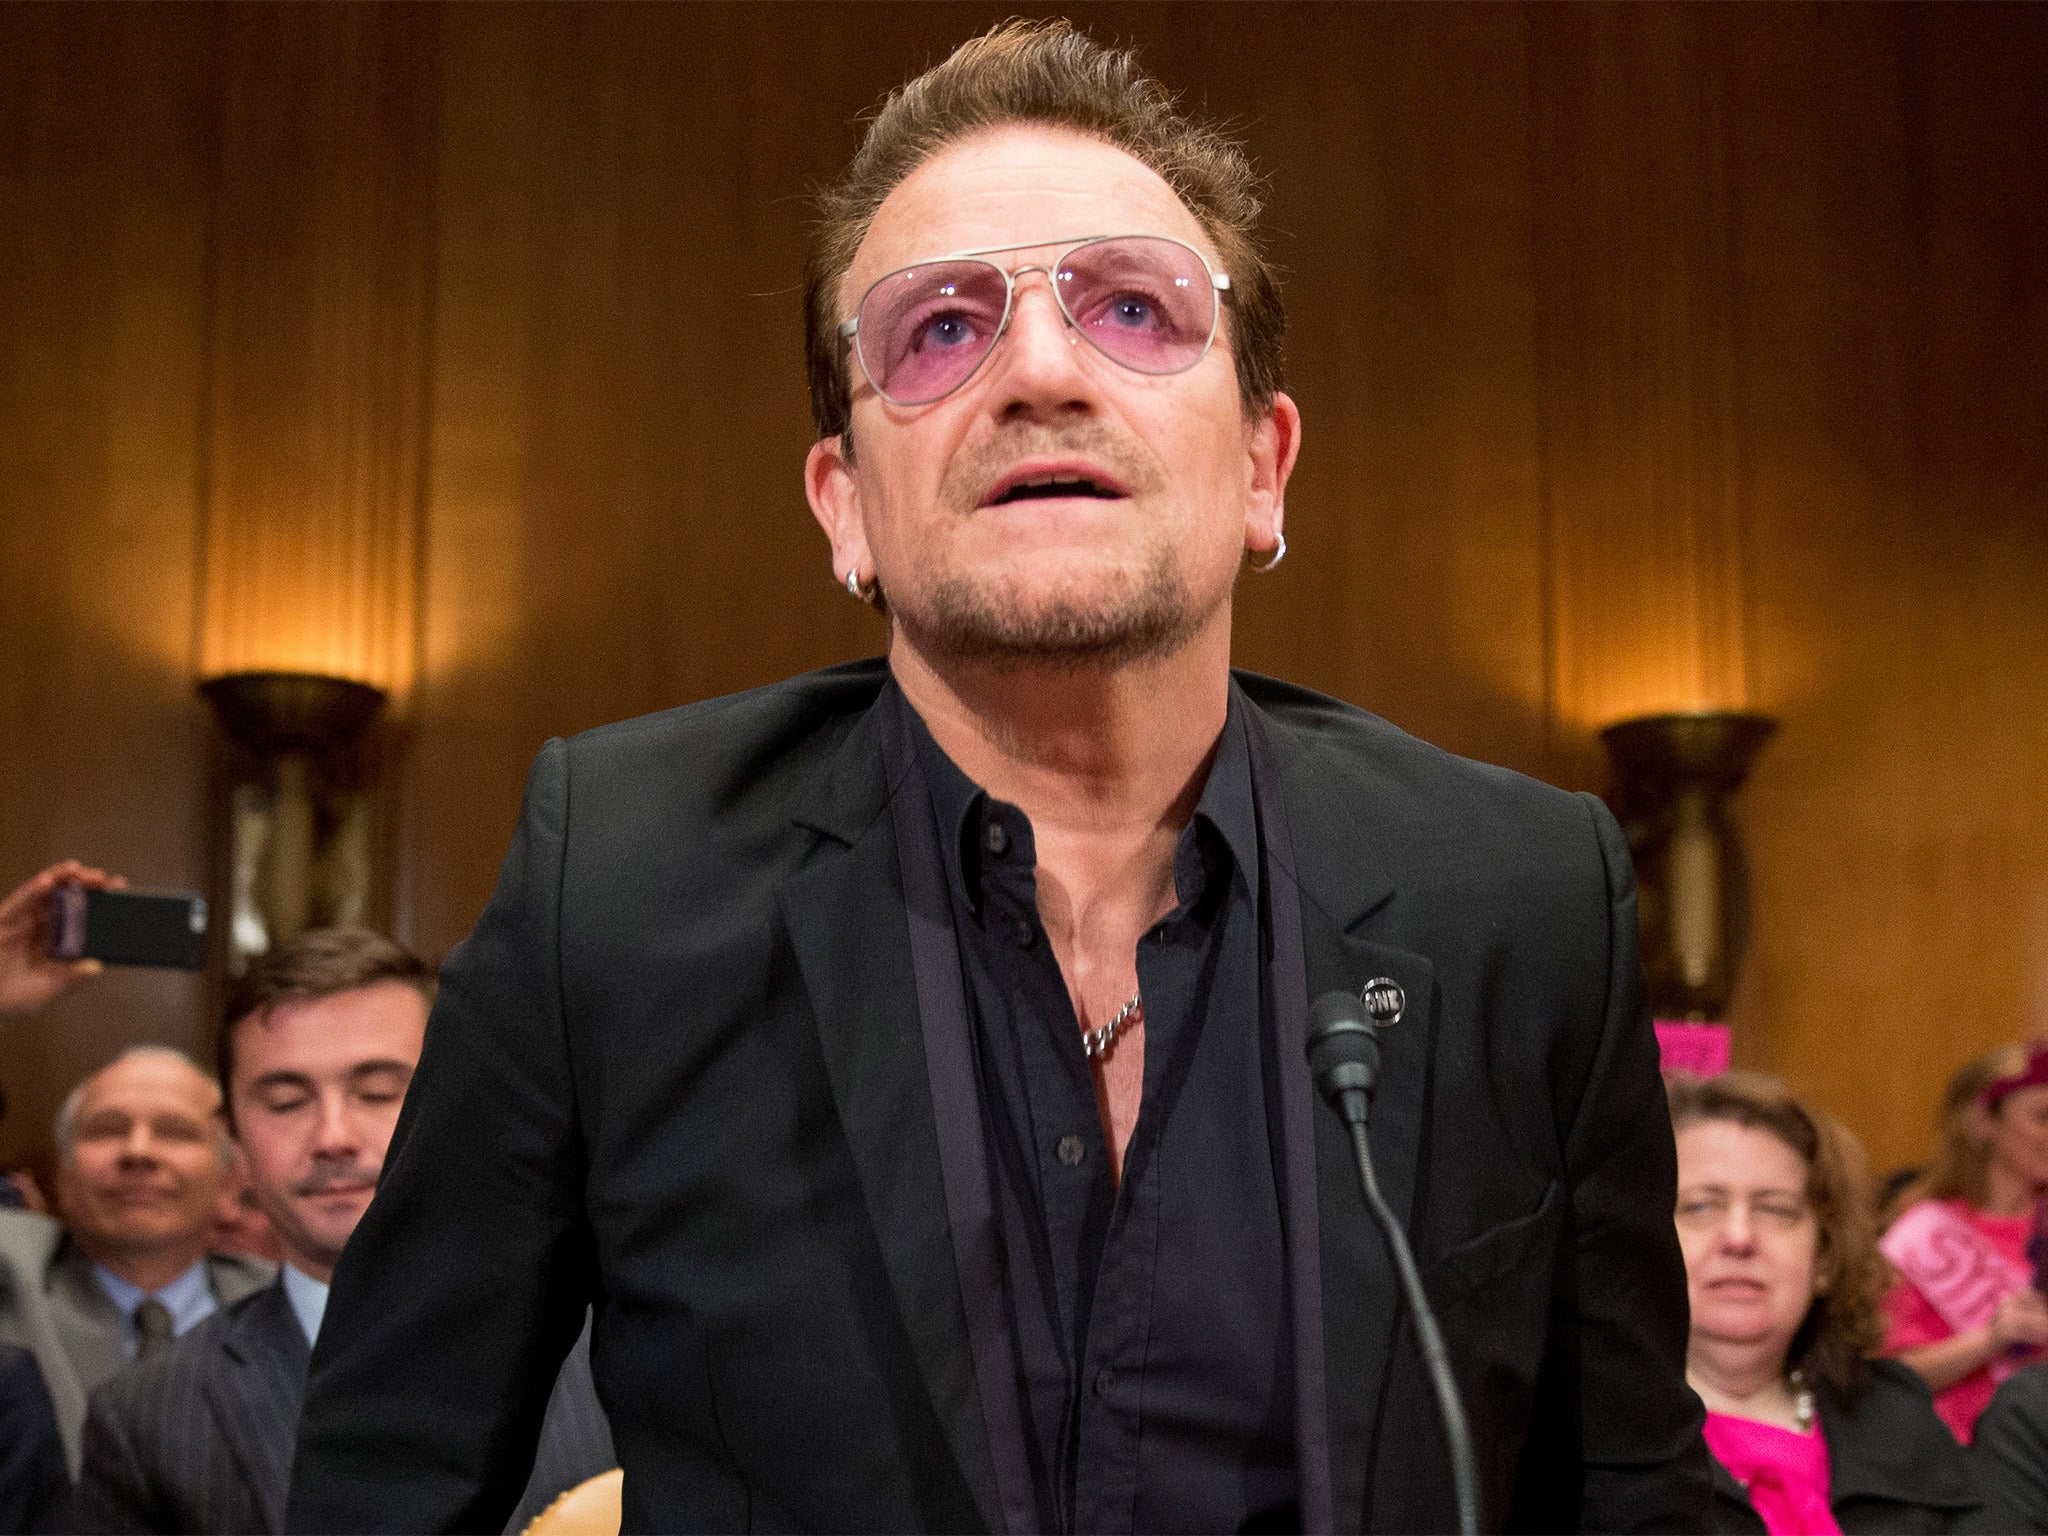 Bono is to testify on the 'causes and consequences of violent extremists, and the role of foreign assistance'